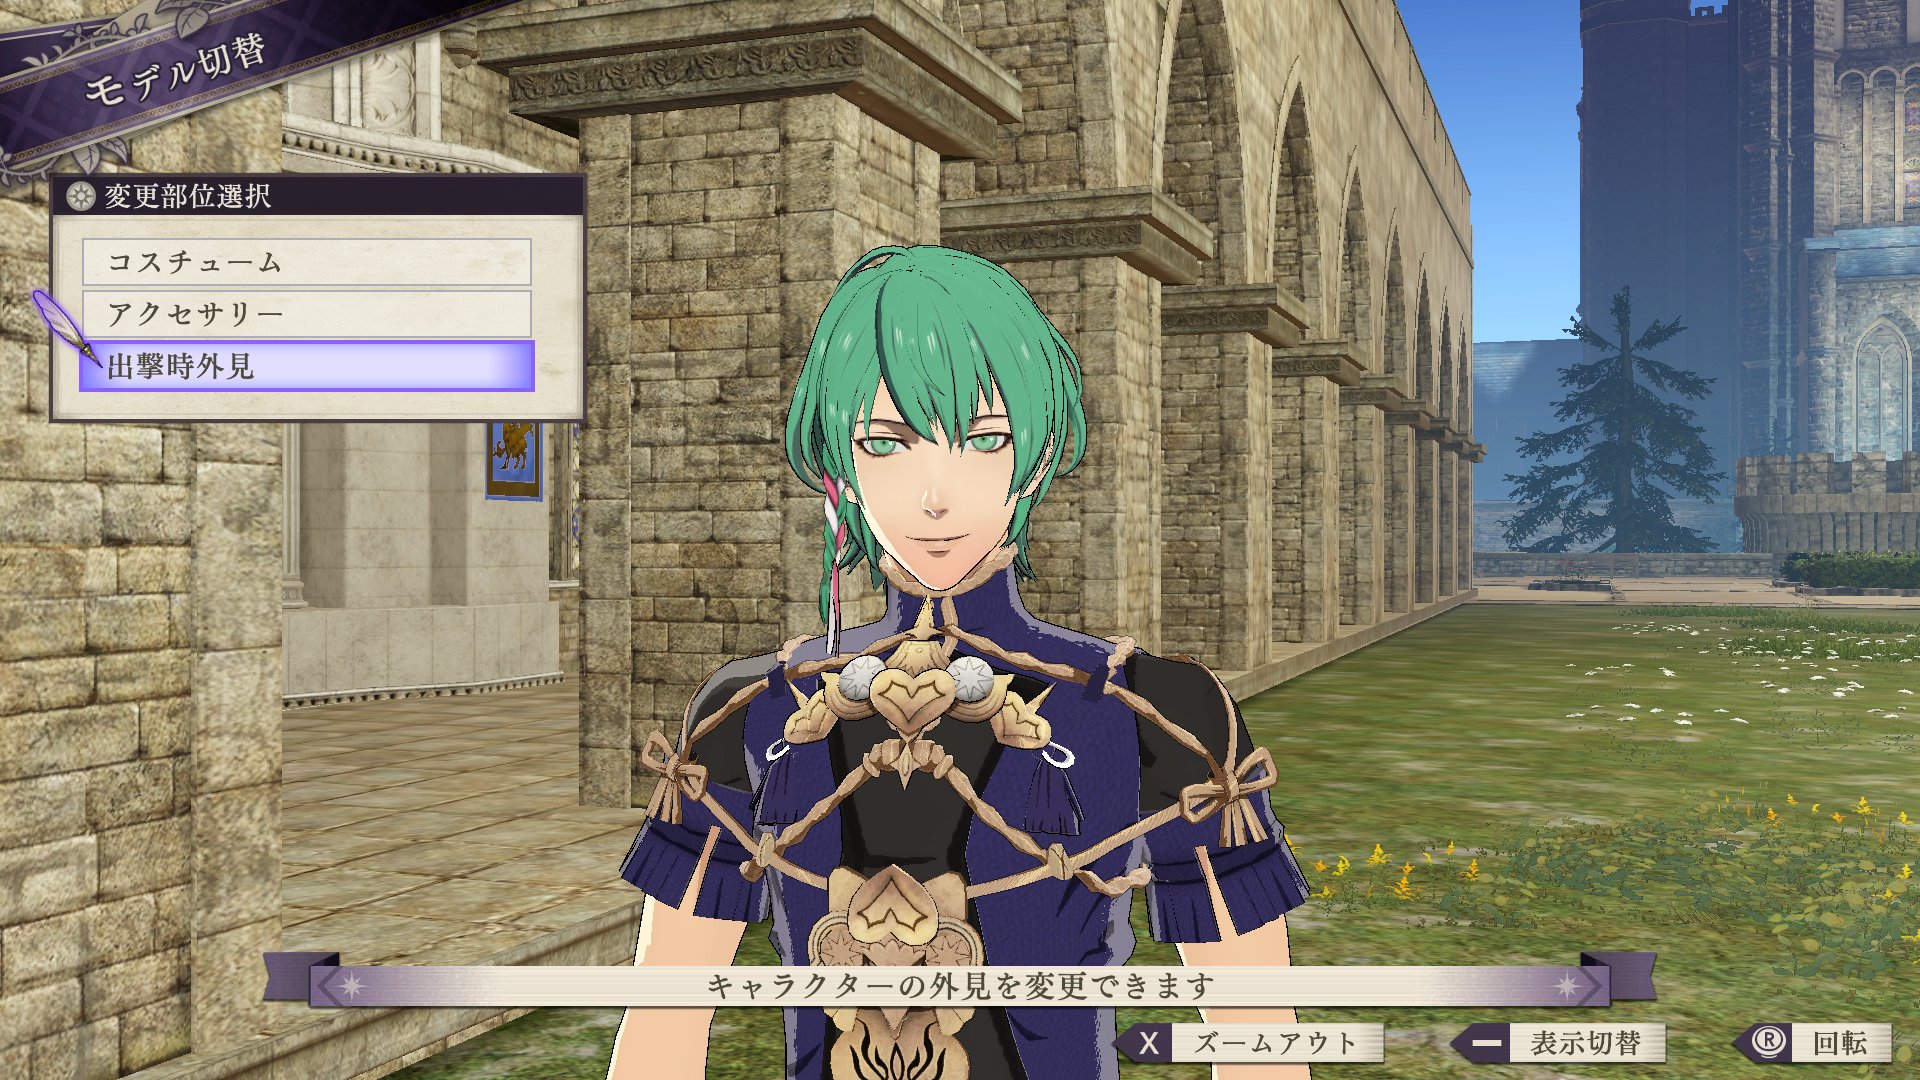 https://www.perfectly-nintendo.com/wp-content/uploads/sites/1/nggallery/fire-emblem-three-houses-19-12-2019/0.jpg